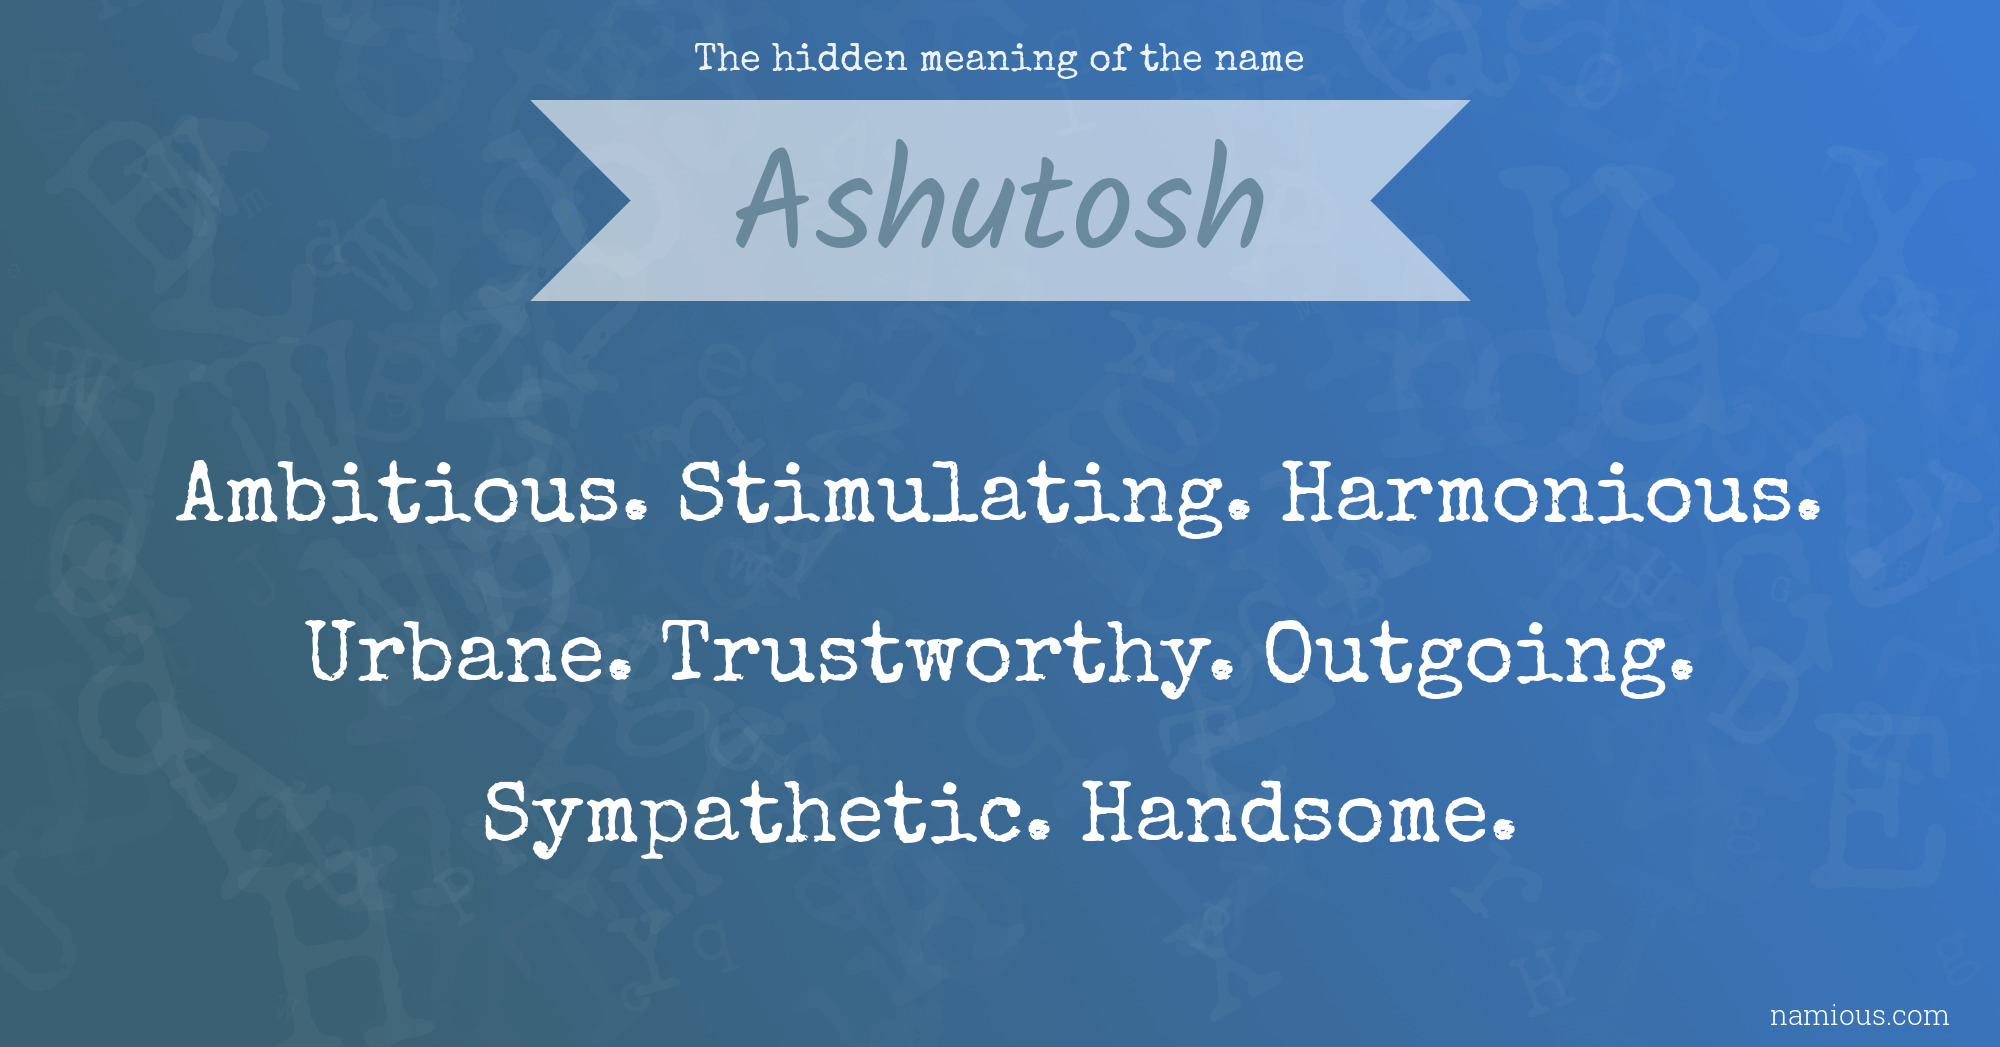 The hidden meaning of the name Ashutosh